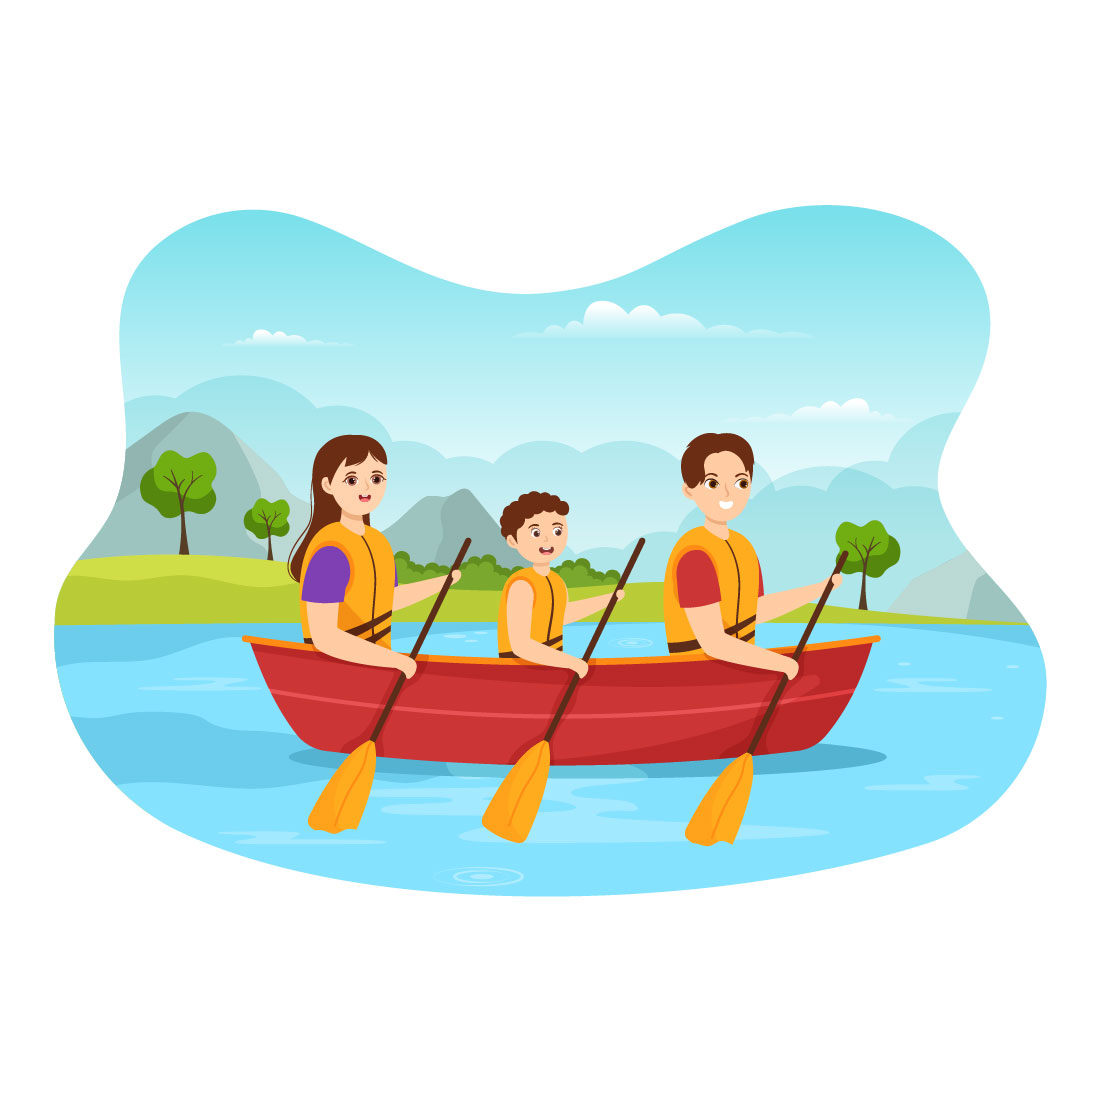 Rowing Sport Illustration cover image.